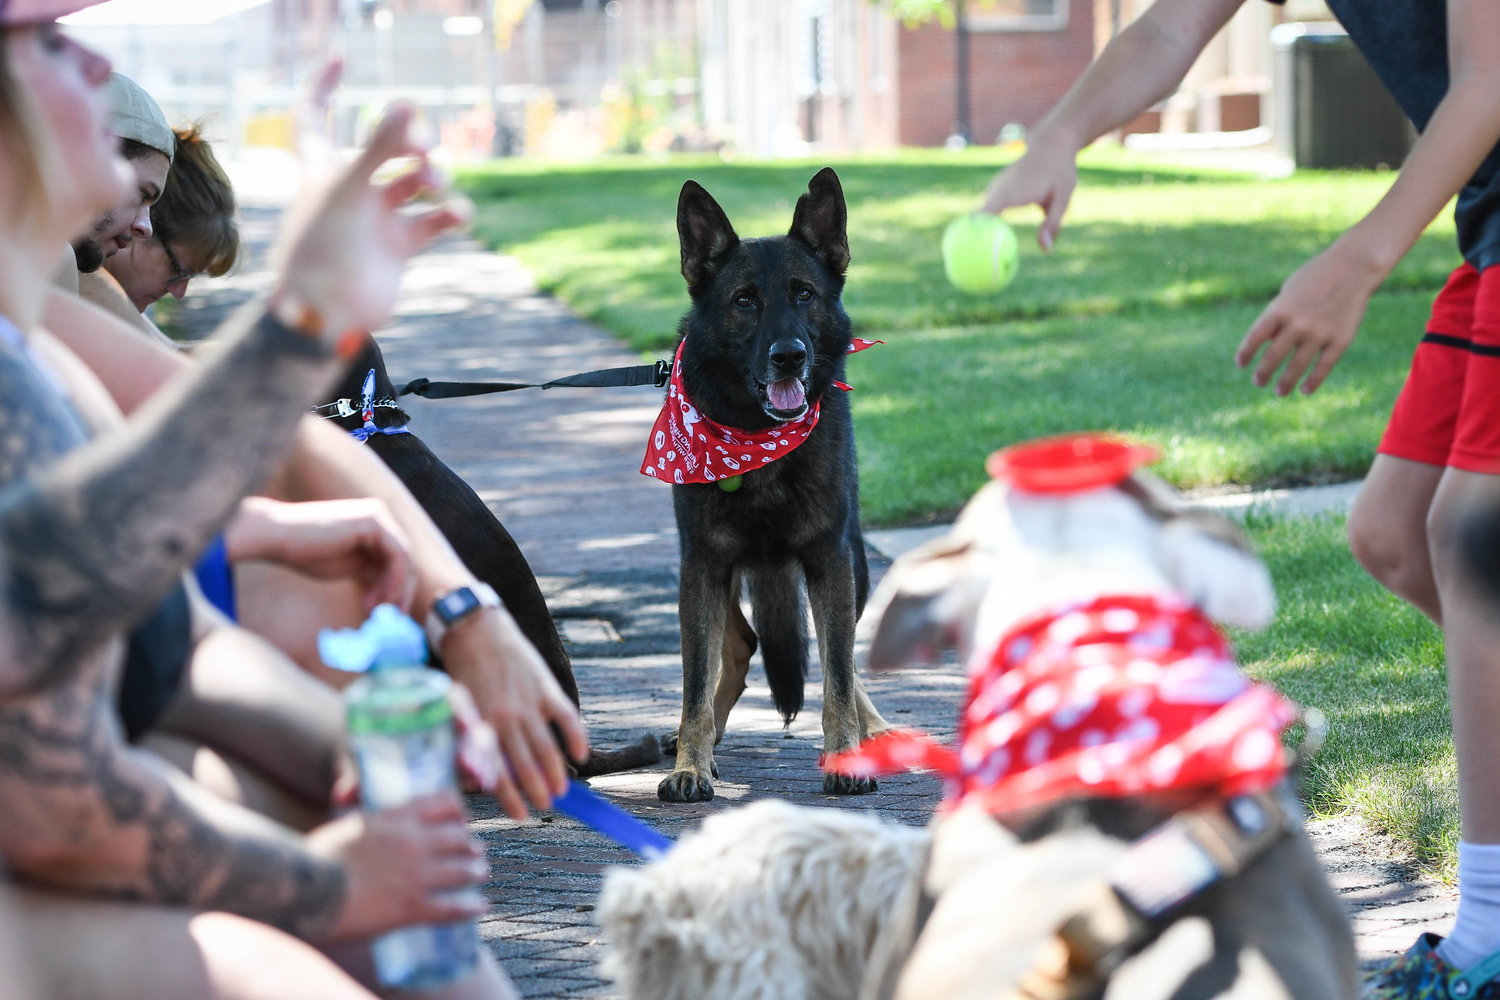 BALL! — Phoenix, a German Shepherd, stares at a tennis ball during a dog show hosted by the Herkimer County Humane Society on Saturday at Central Plaza in Ilion. The show was part of a long list of events hosted during Ilion Days 2022 last week.